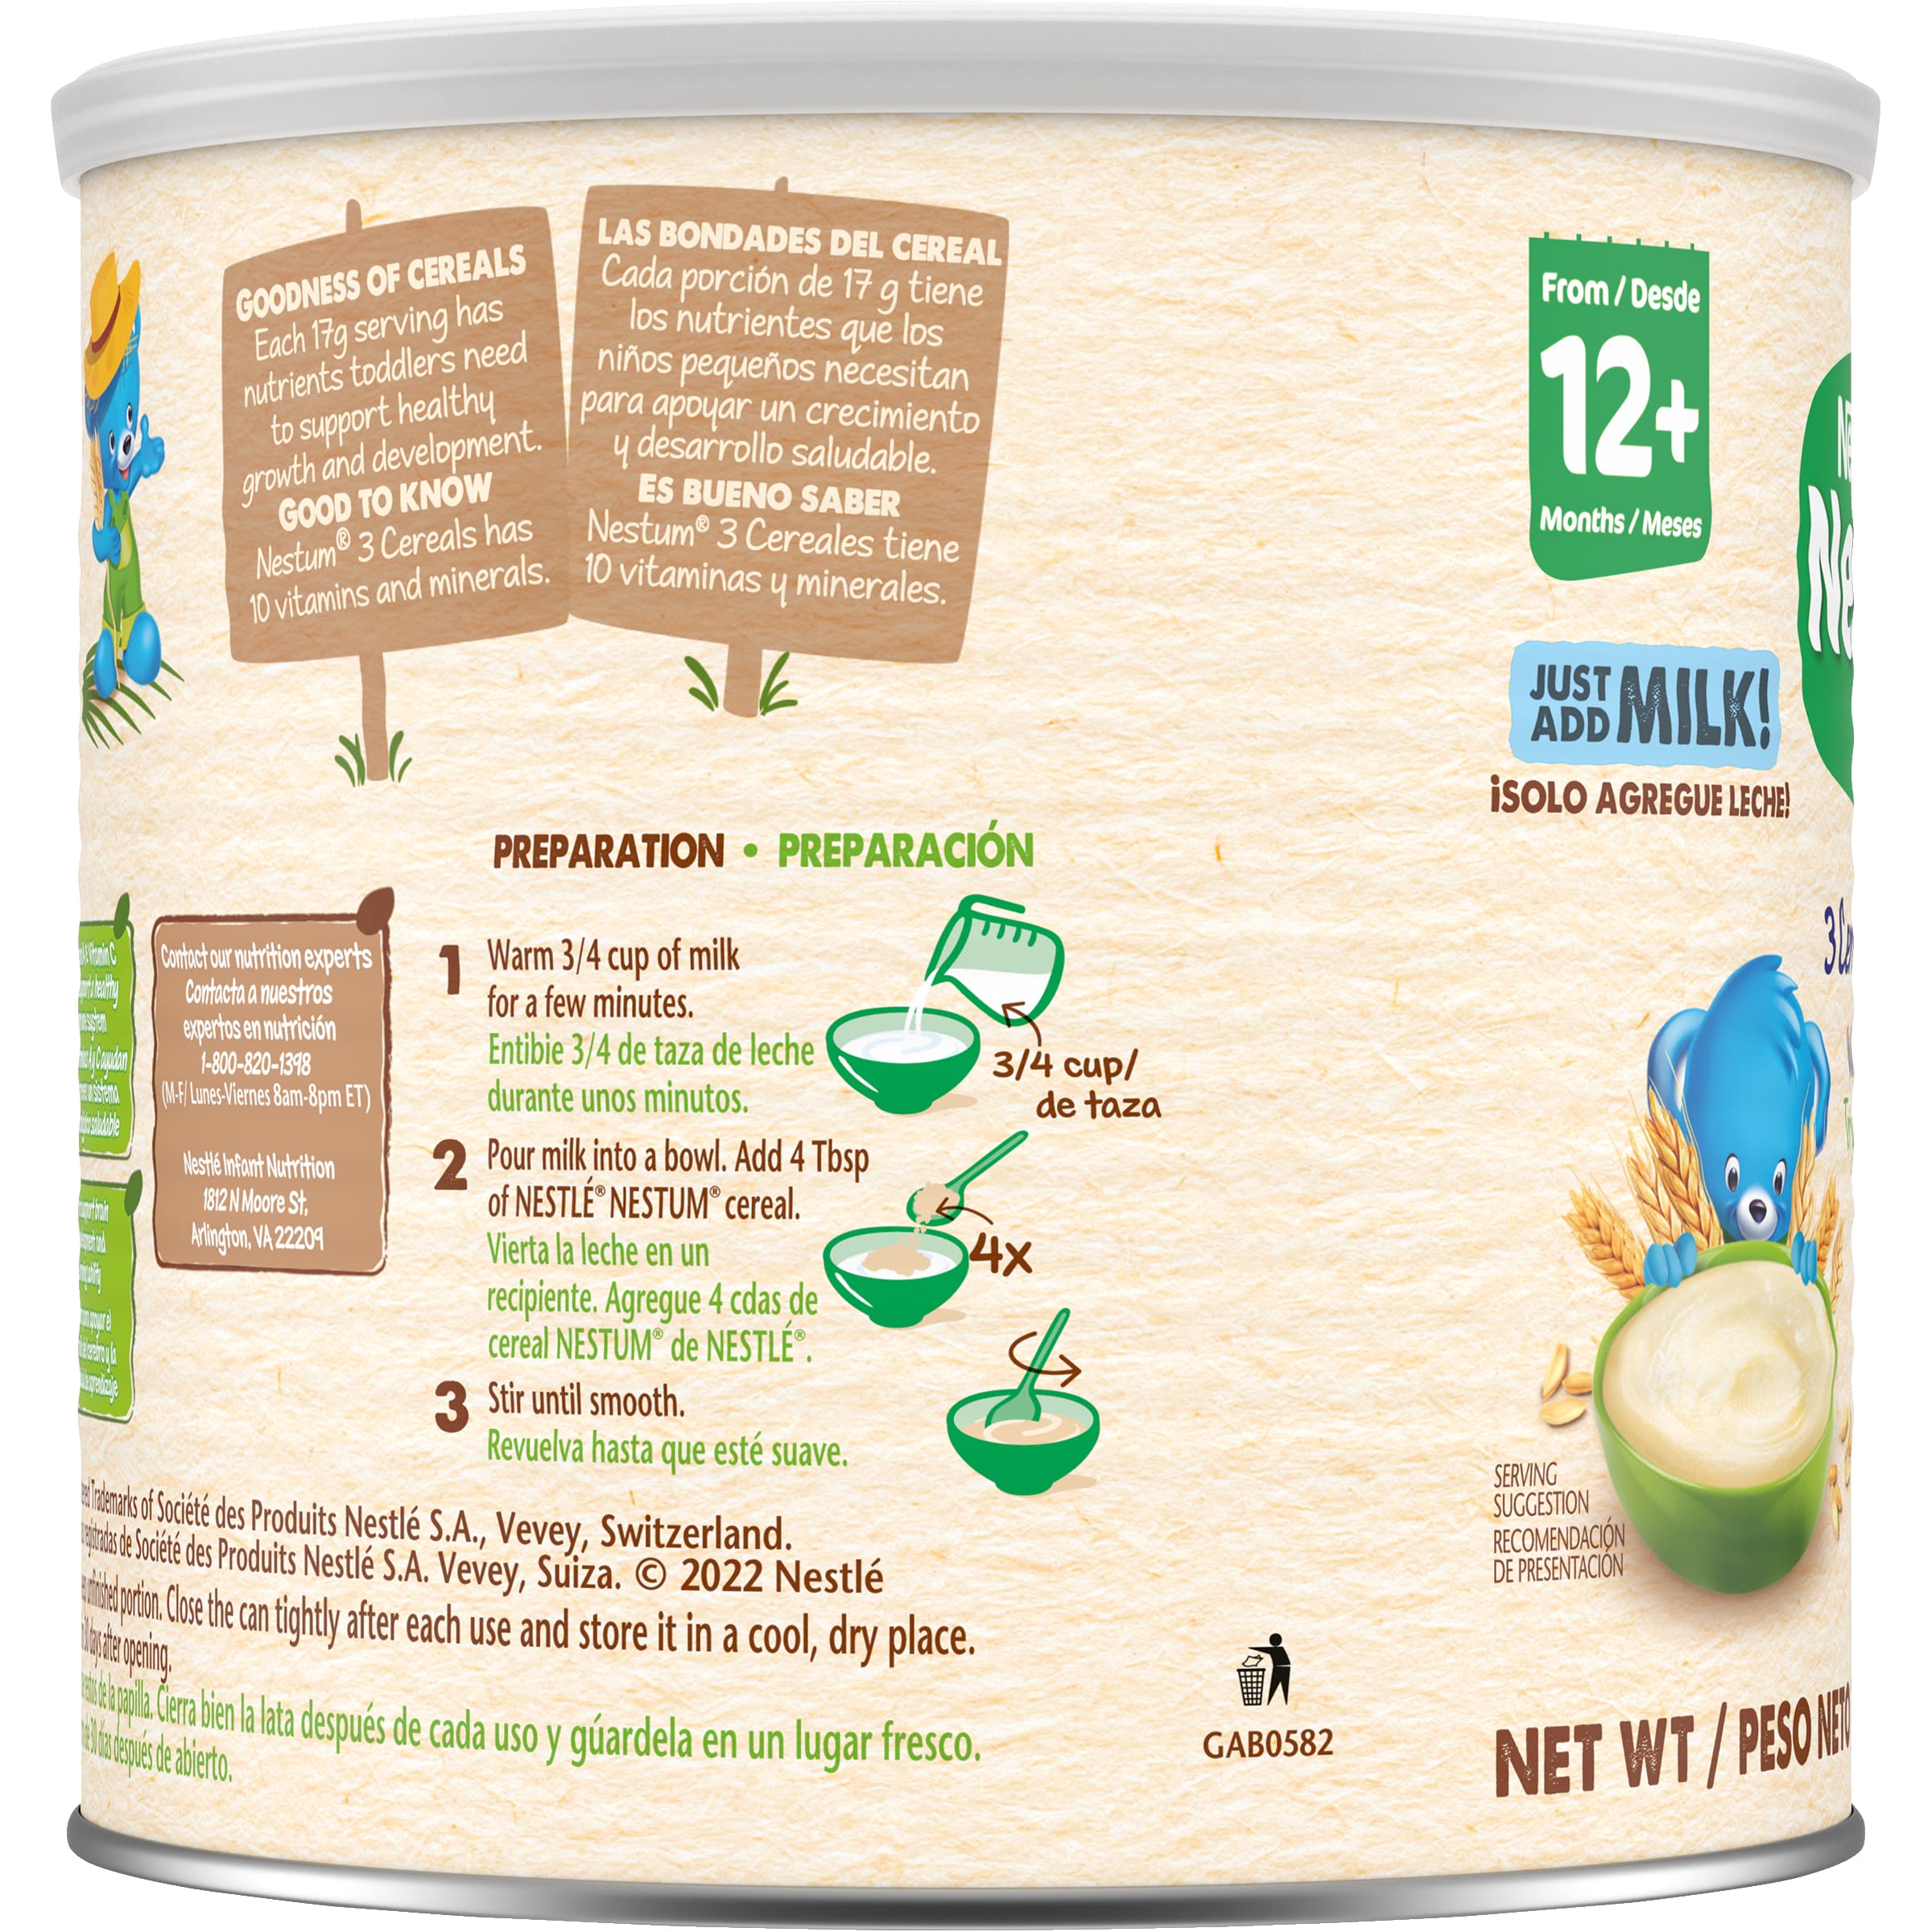 Nestle Nestum Junior Cereal, 3 Cereals - Wheat, Corn & Rice, Made for Toddlers 12 Months, 14.1 OZ Canister (Pack of 1)